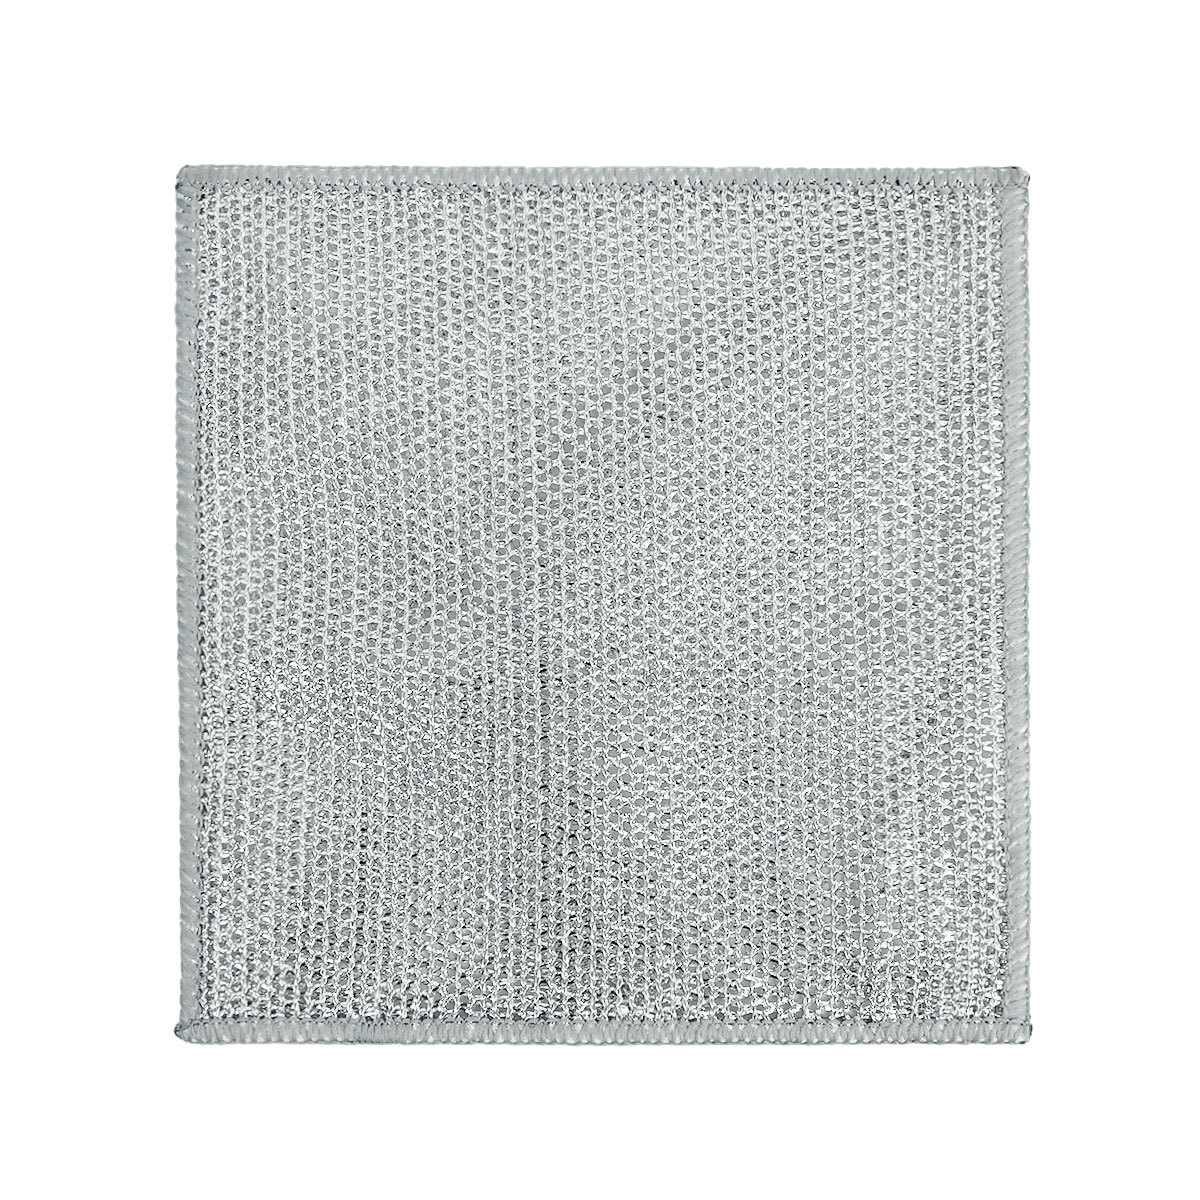 Dish Towel Single-Layer Silver Wire Sponge Thickening Absorbent Oil-Free Daily Rag Household Cleaning Decontamination Steel Wire Dishwashing